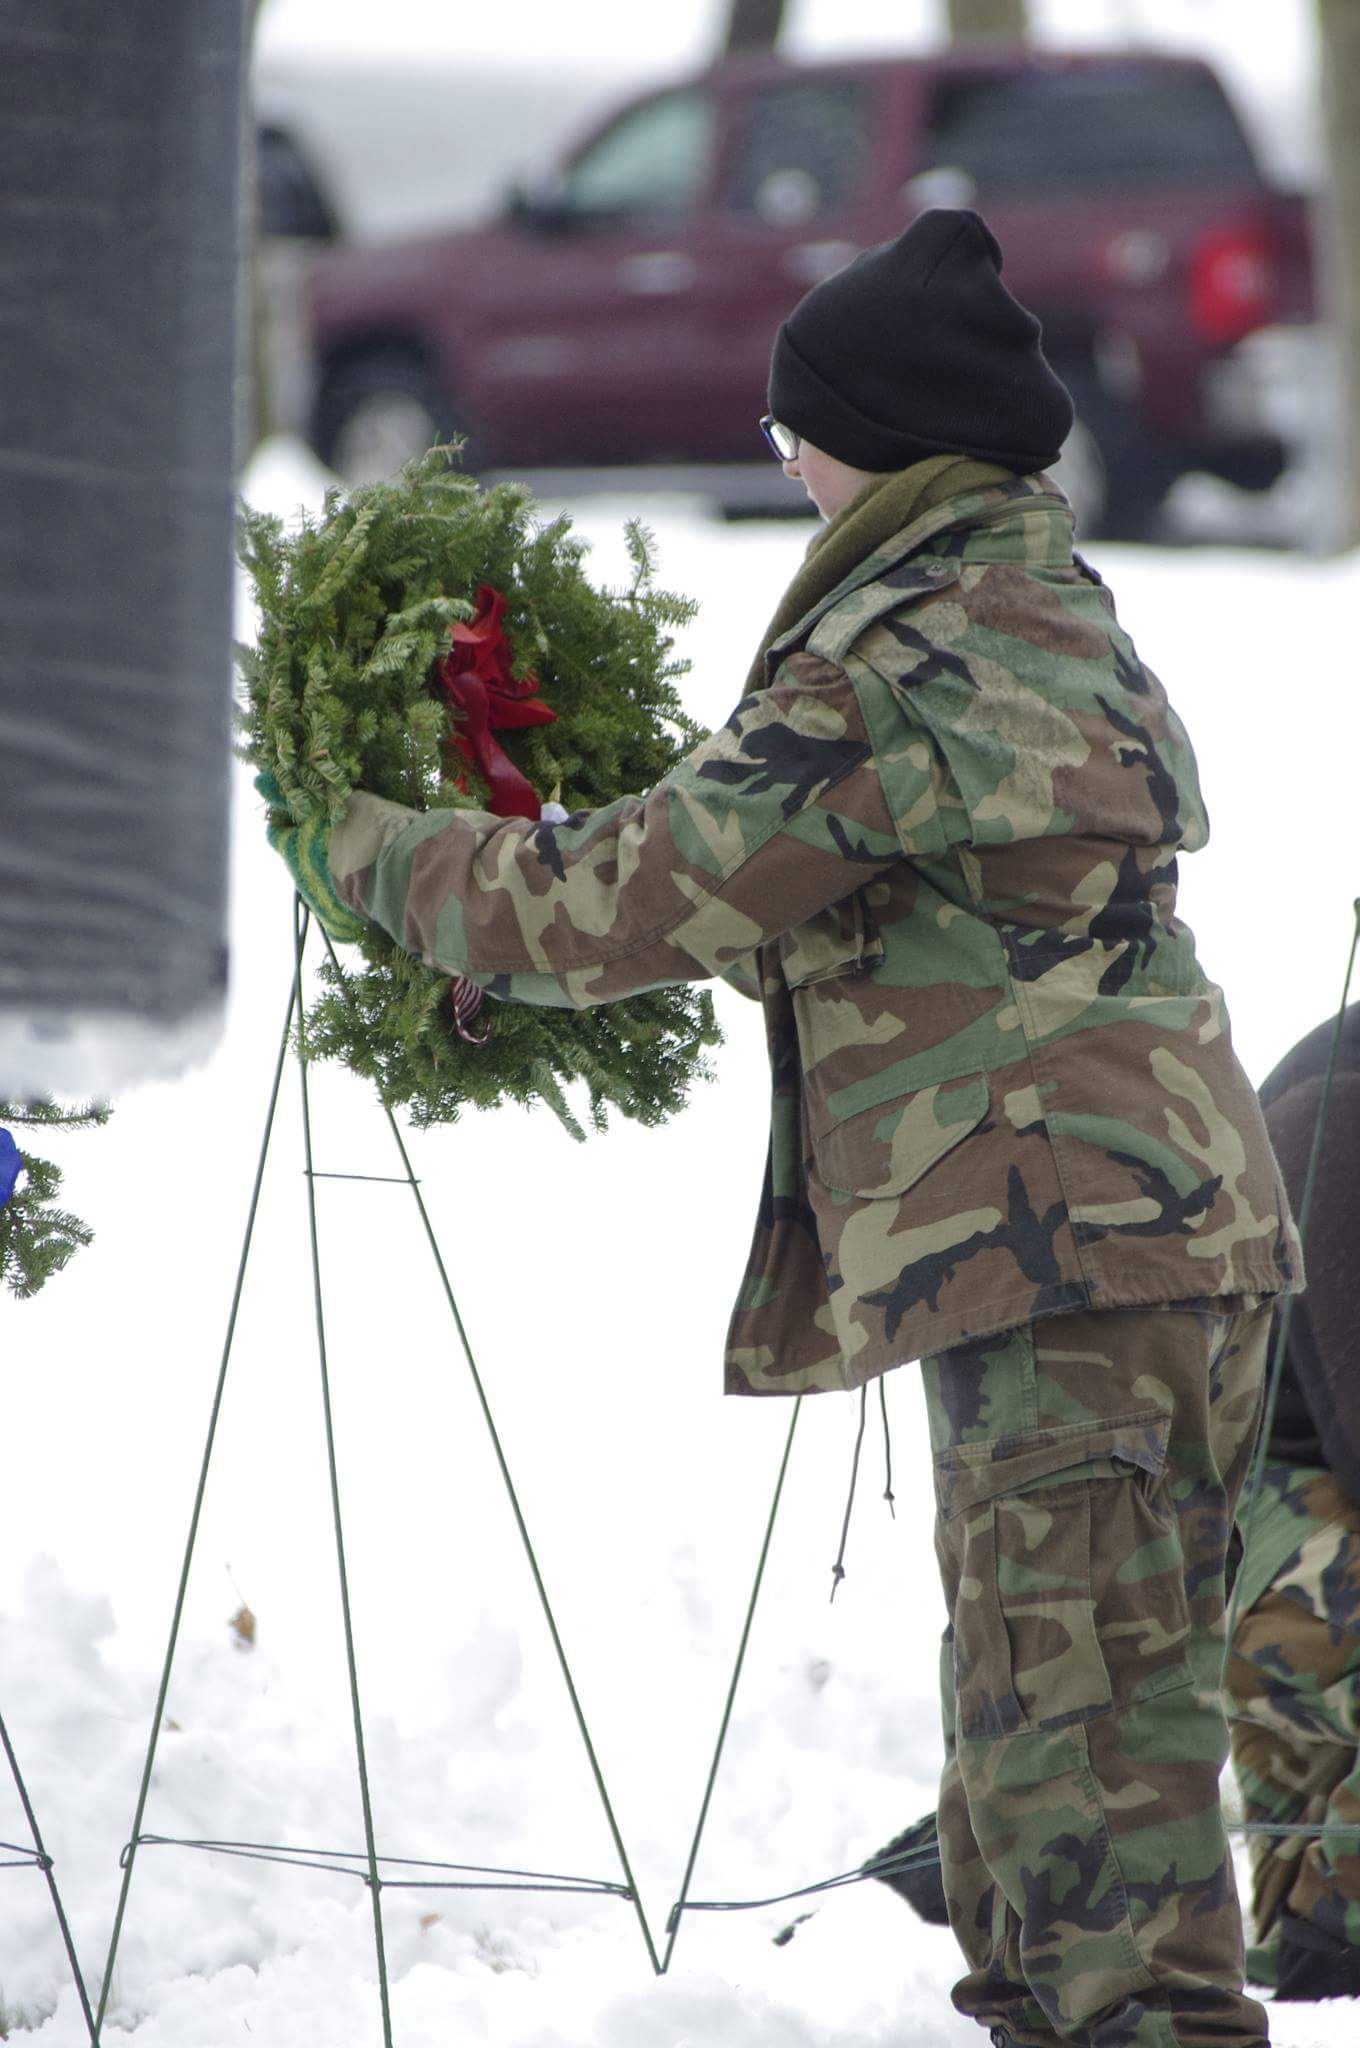 A Royal Charter Composite Squadron, Civil Air Patrol, US Air Force Auxiliary Cadet places a wreath in honor of one of six US Military Branch?es.